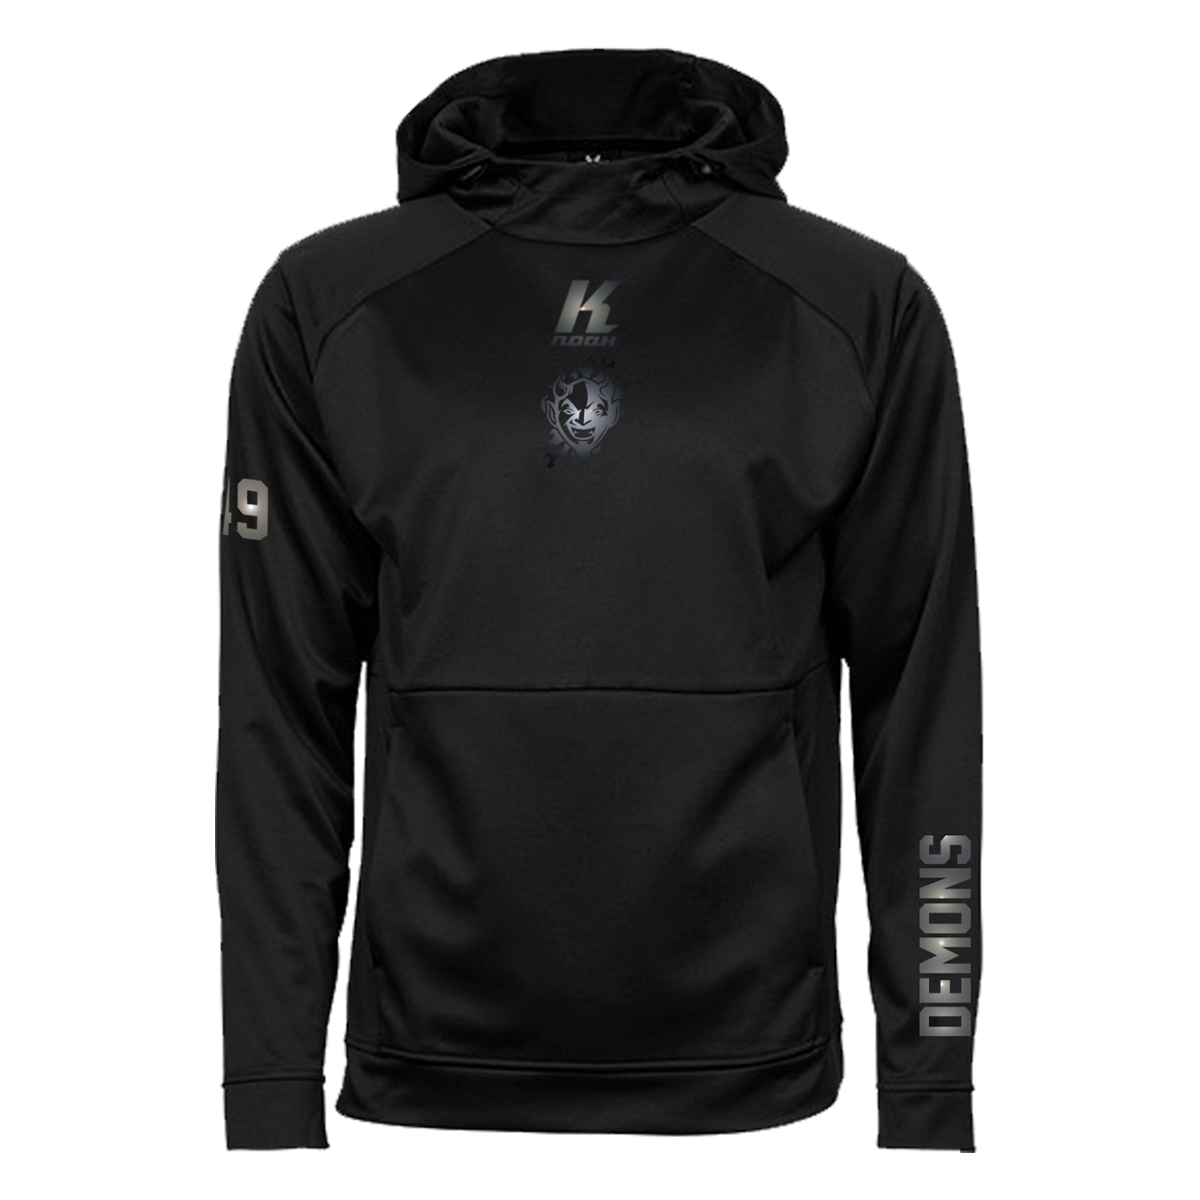 Demons "Blackline" Performance Hoodie JH006 with Playernumber or Initials